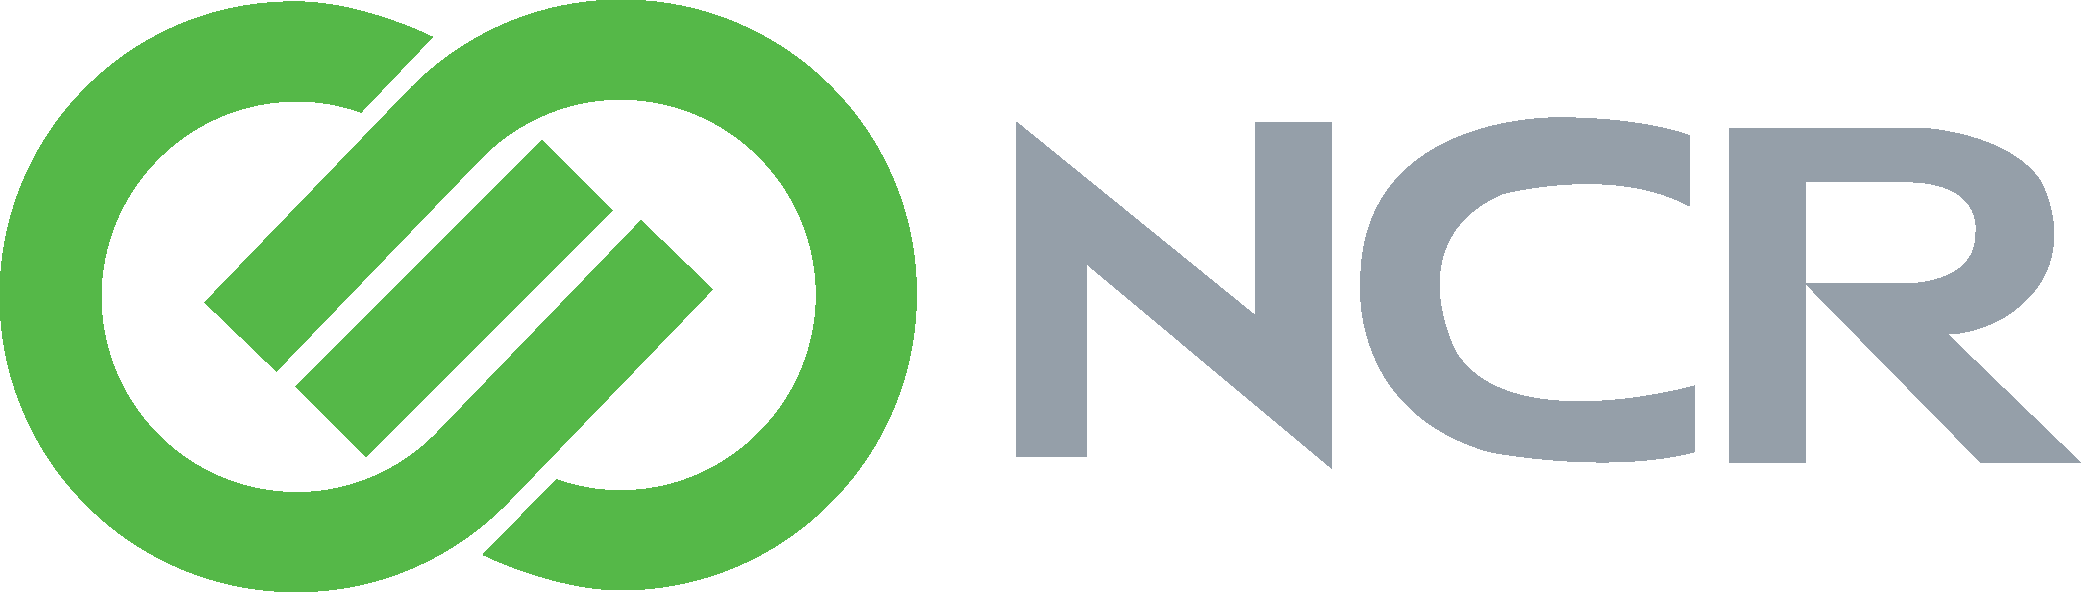 NCR_logo_without_background